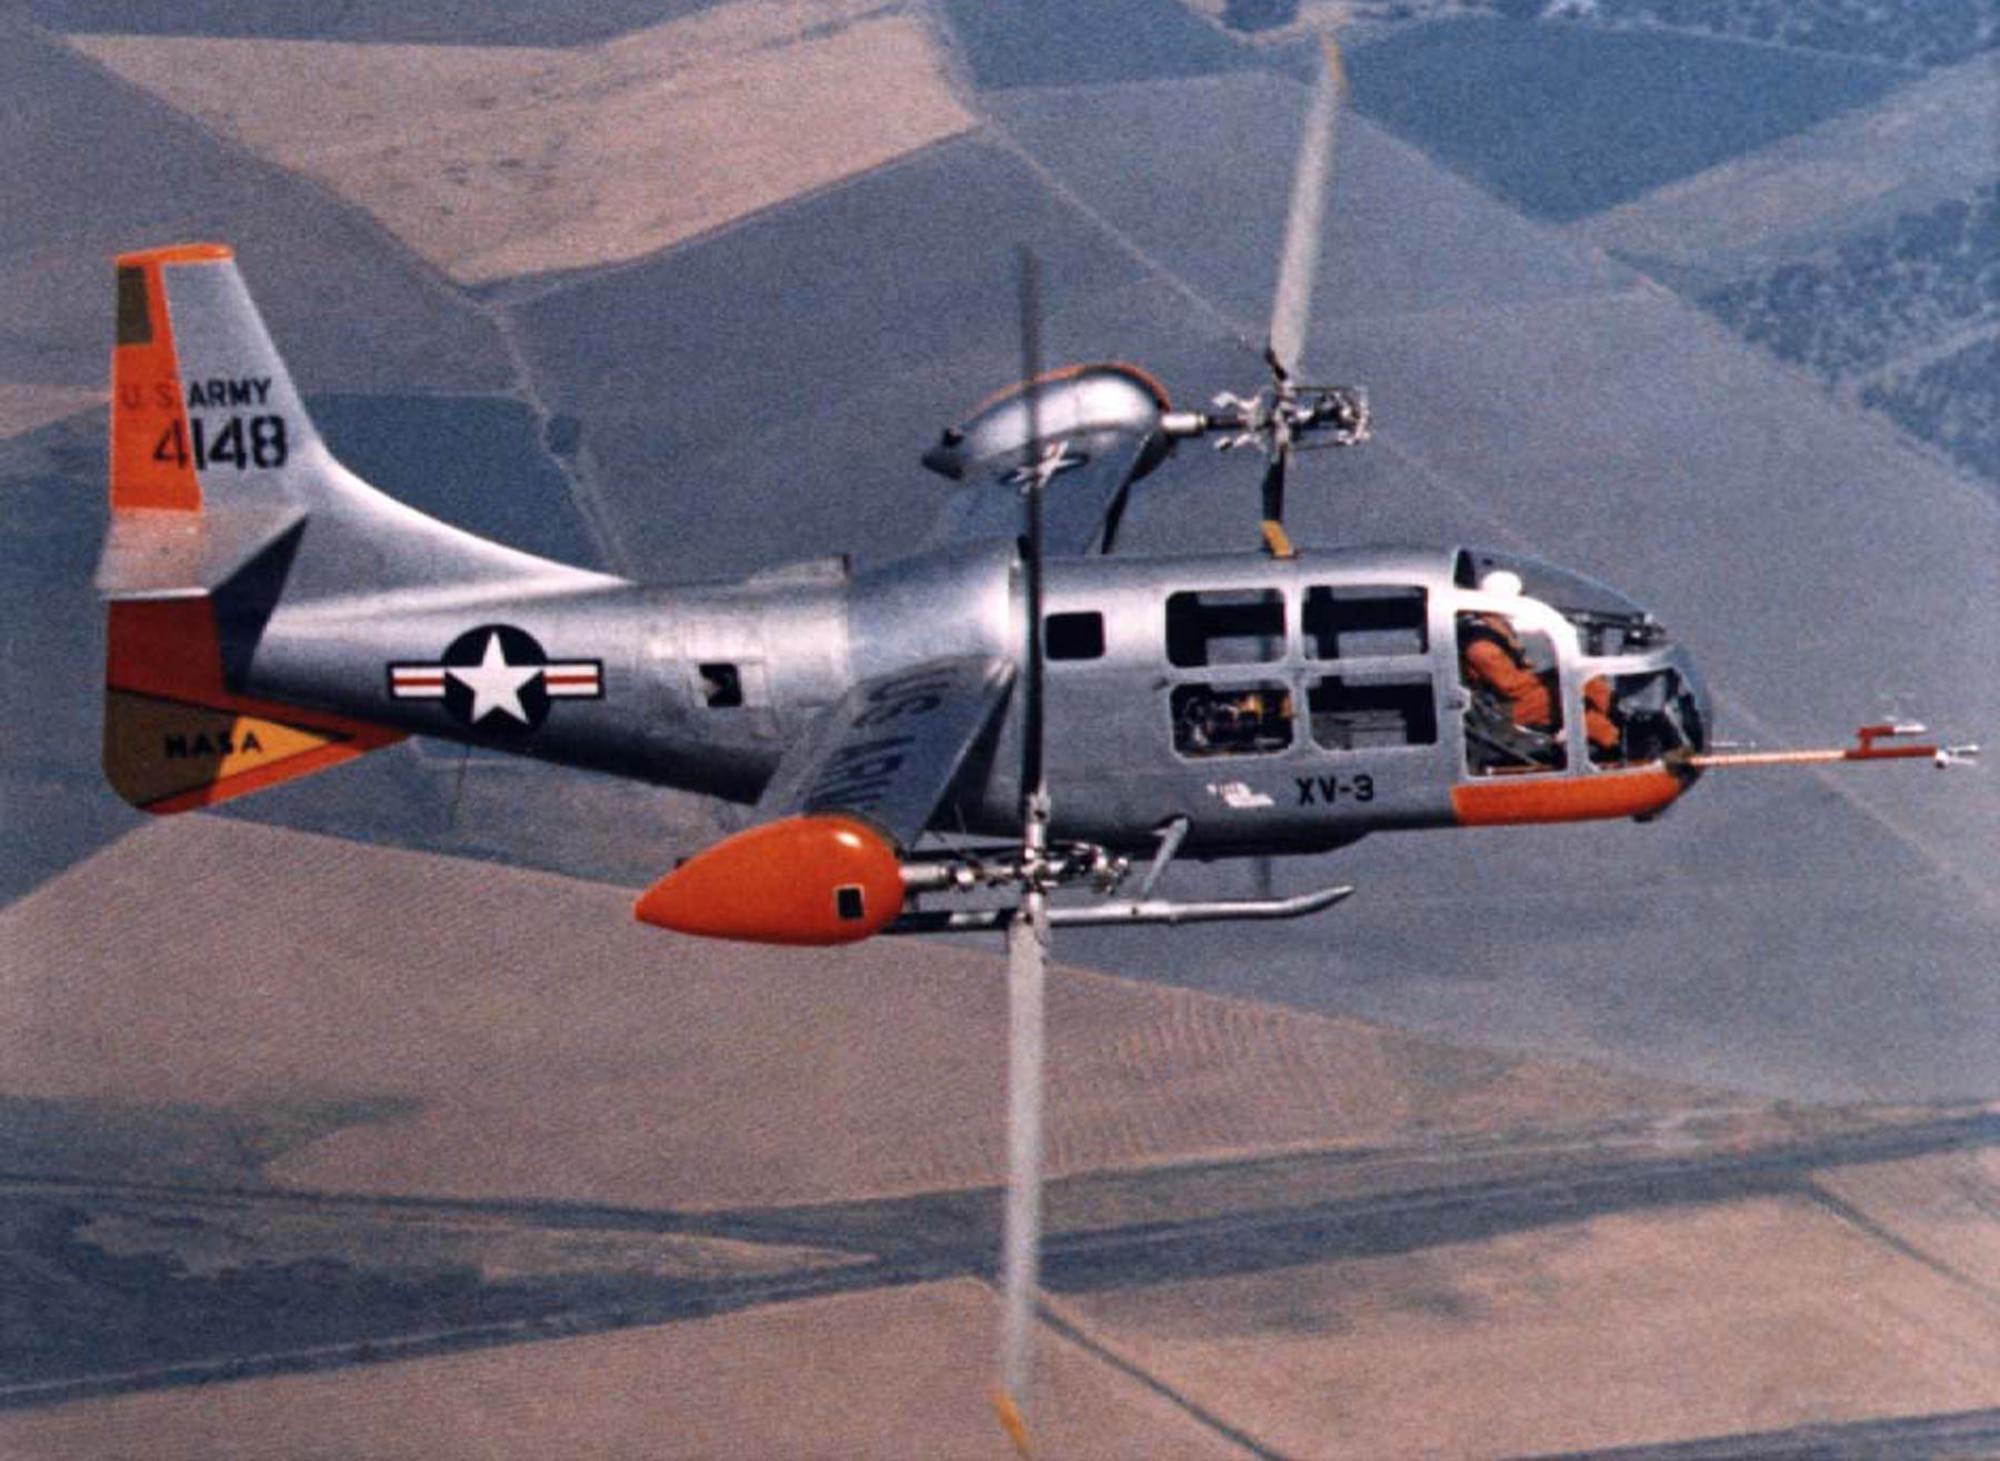 Bell Helicopter XV-3 with the proprotors rotated forward for level flight. (Photo courtesy of Bell Helicopter Textron)